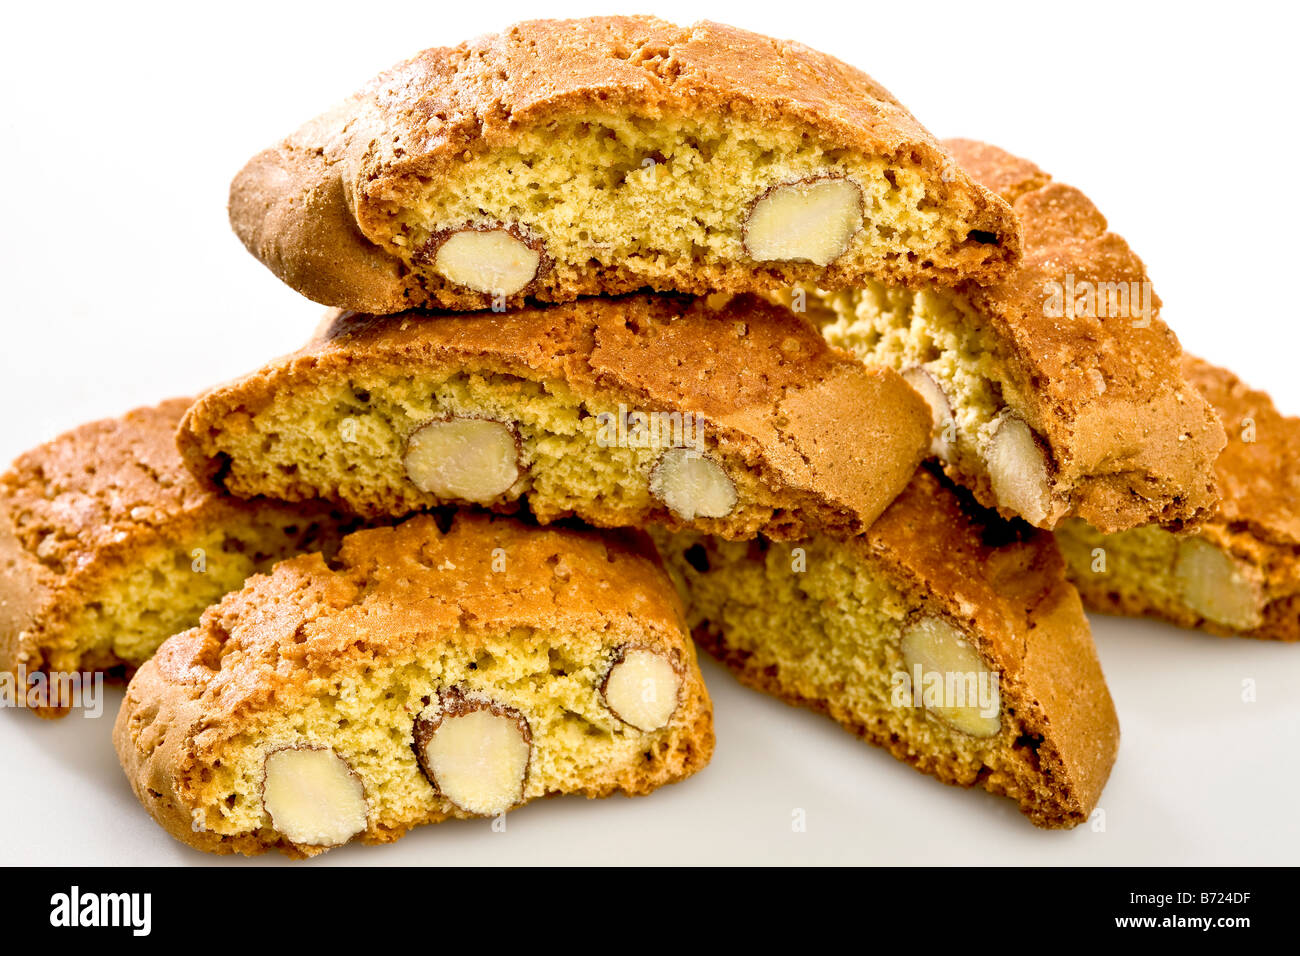 Tuscany almond biscuits Stock Photo